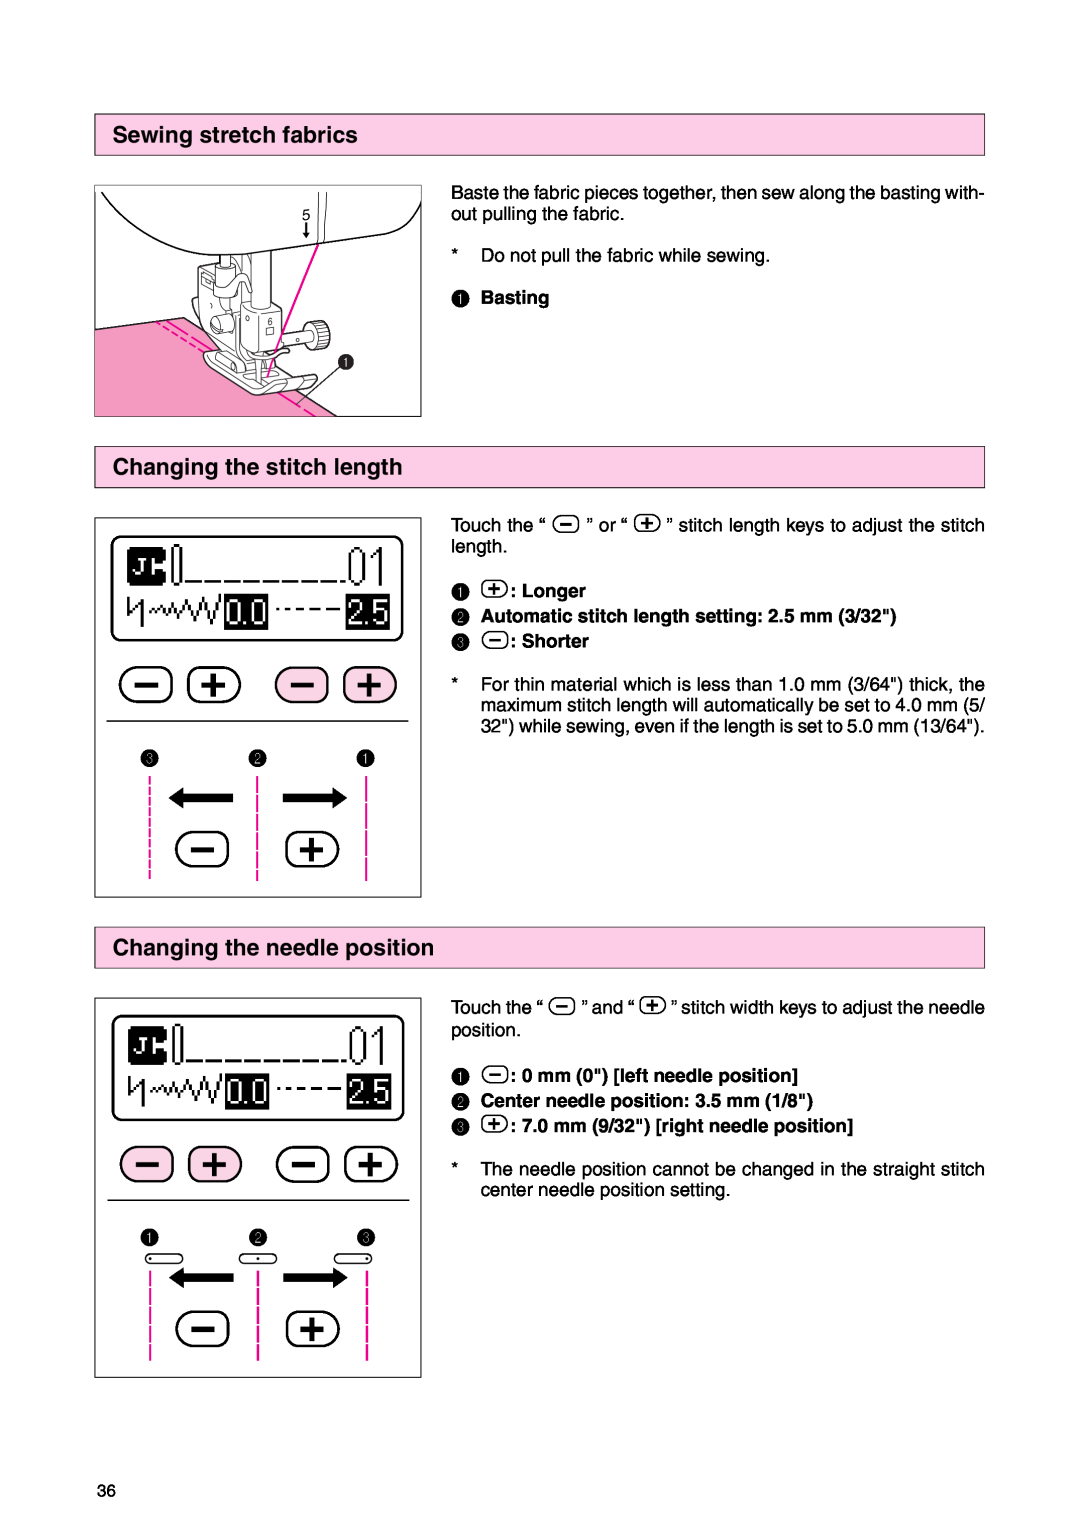 Brother PC 3000 Sewing stretch fabrics, Changing the stitch length, Changing the needle position, Basting, Touch the “ 